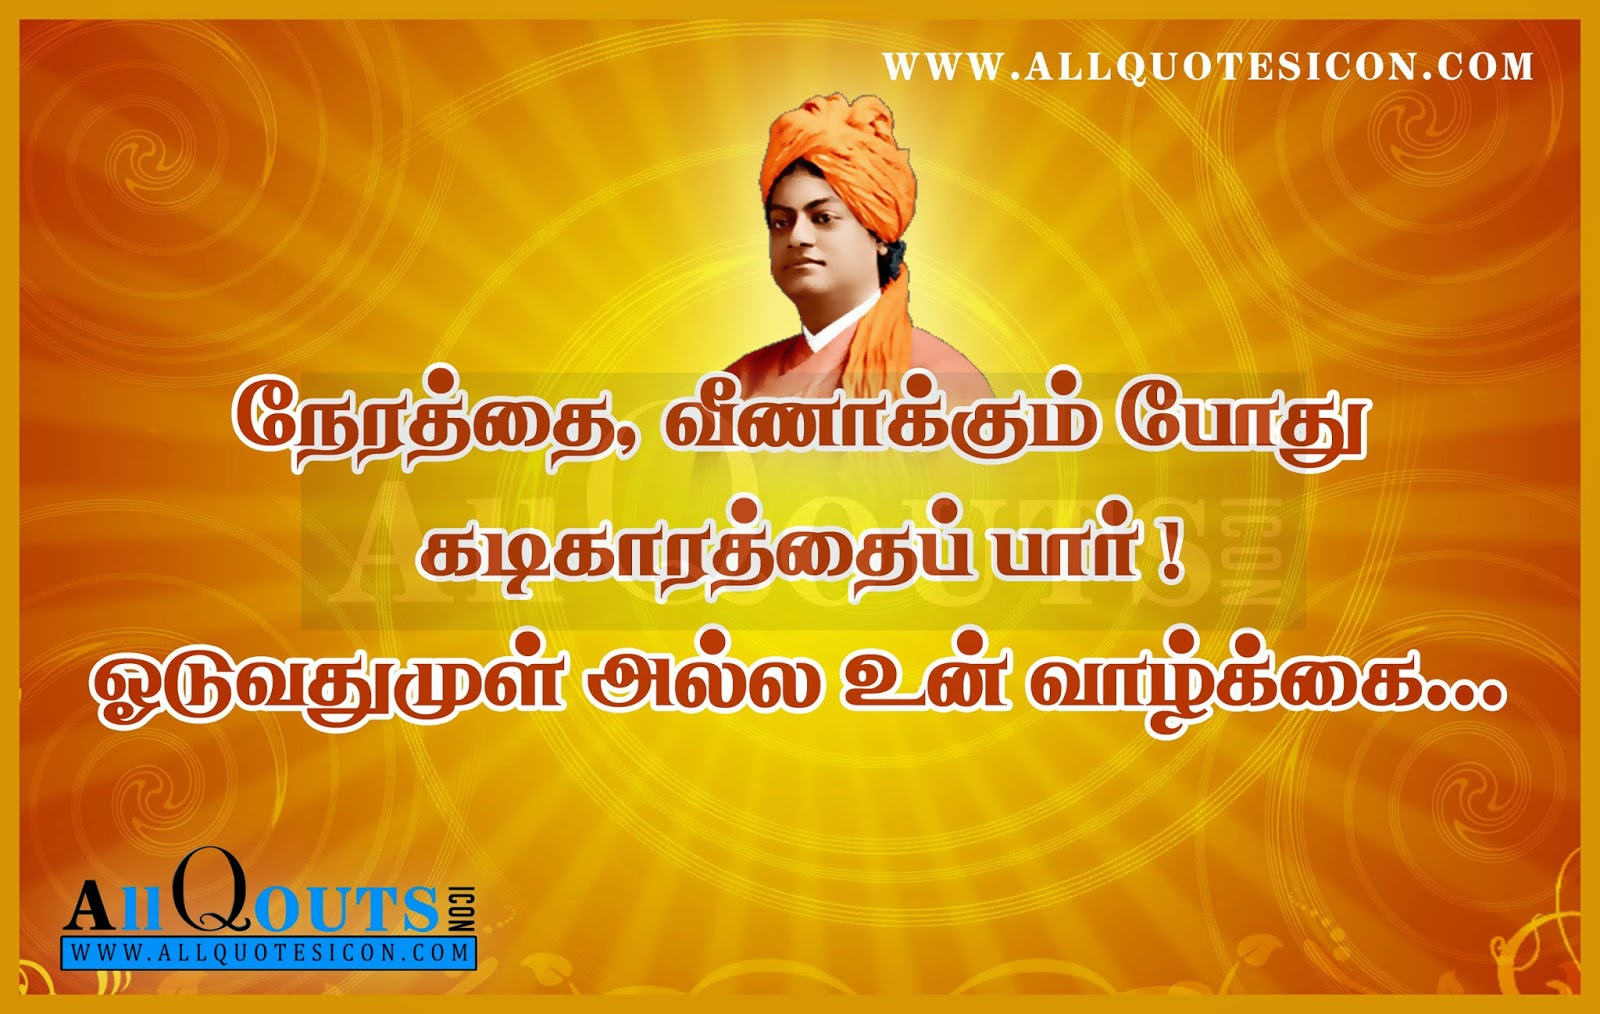 Vivekananda Tamil Quotes Images Wallpapers Pictures - Arunima Sinha - HD Wallpaper 